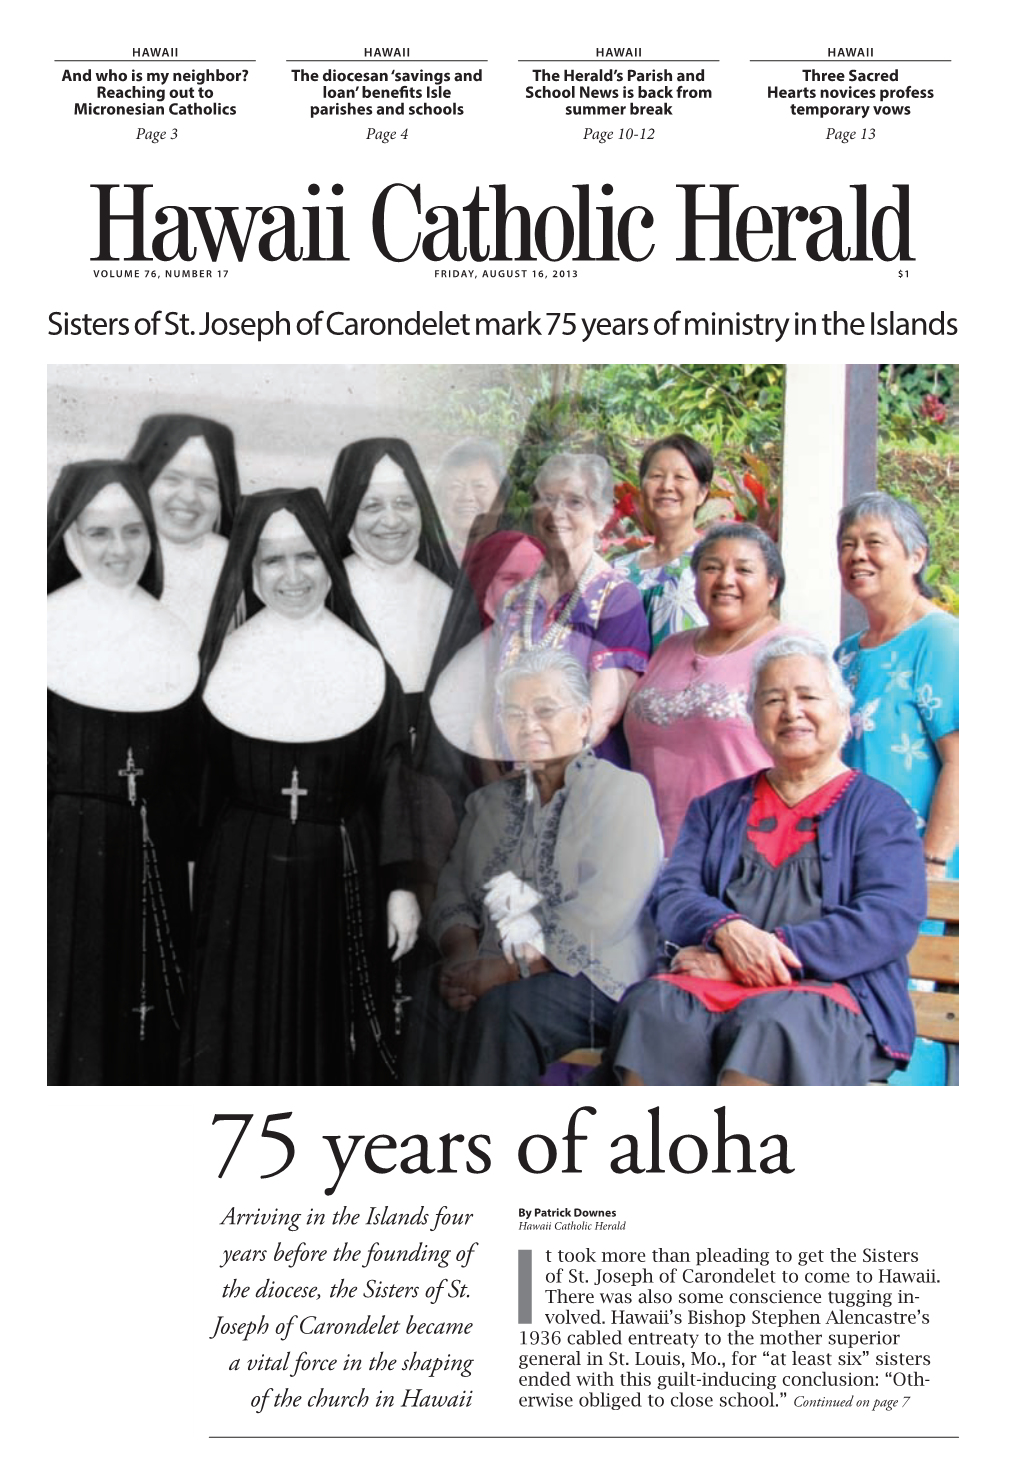 Sisters of St. Joseph of Carondelet Mark 75 Years of Ministry in the Islands